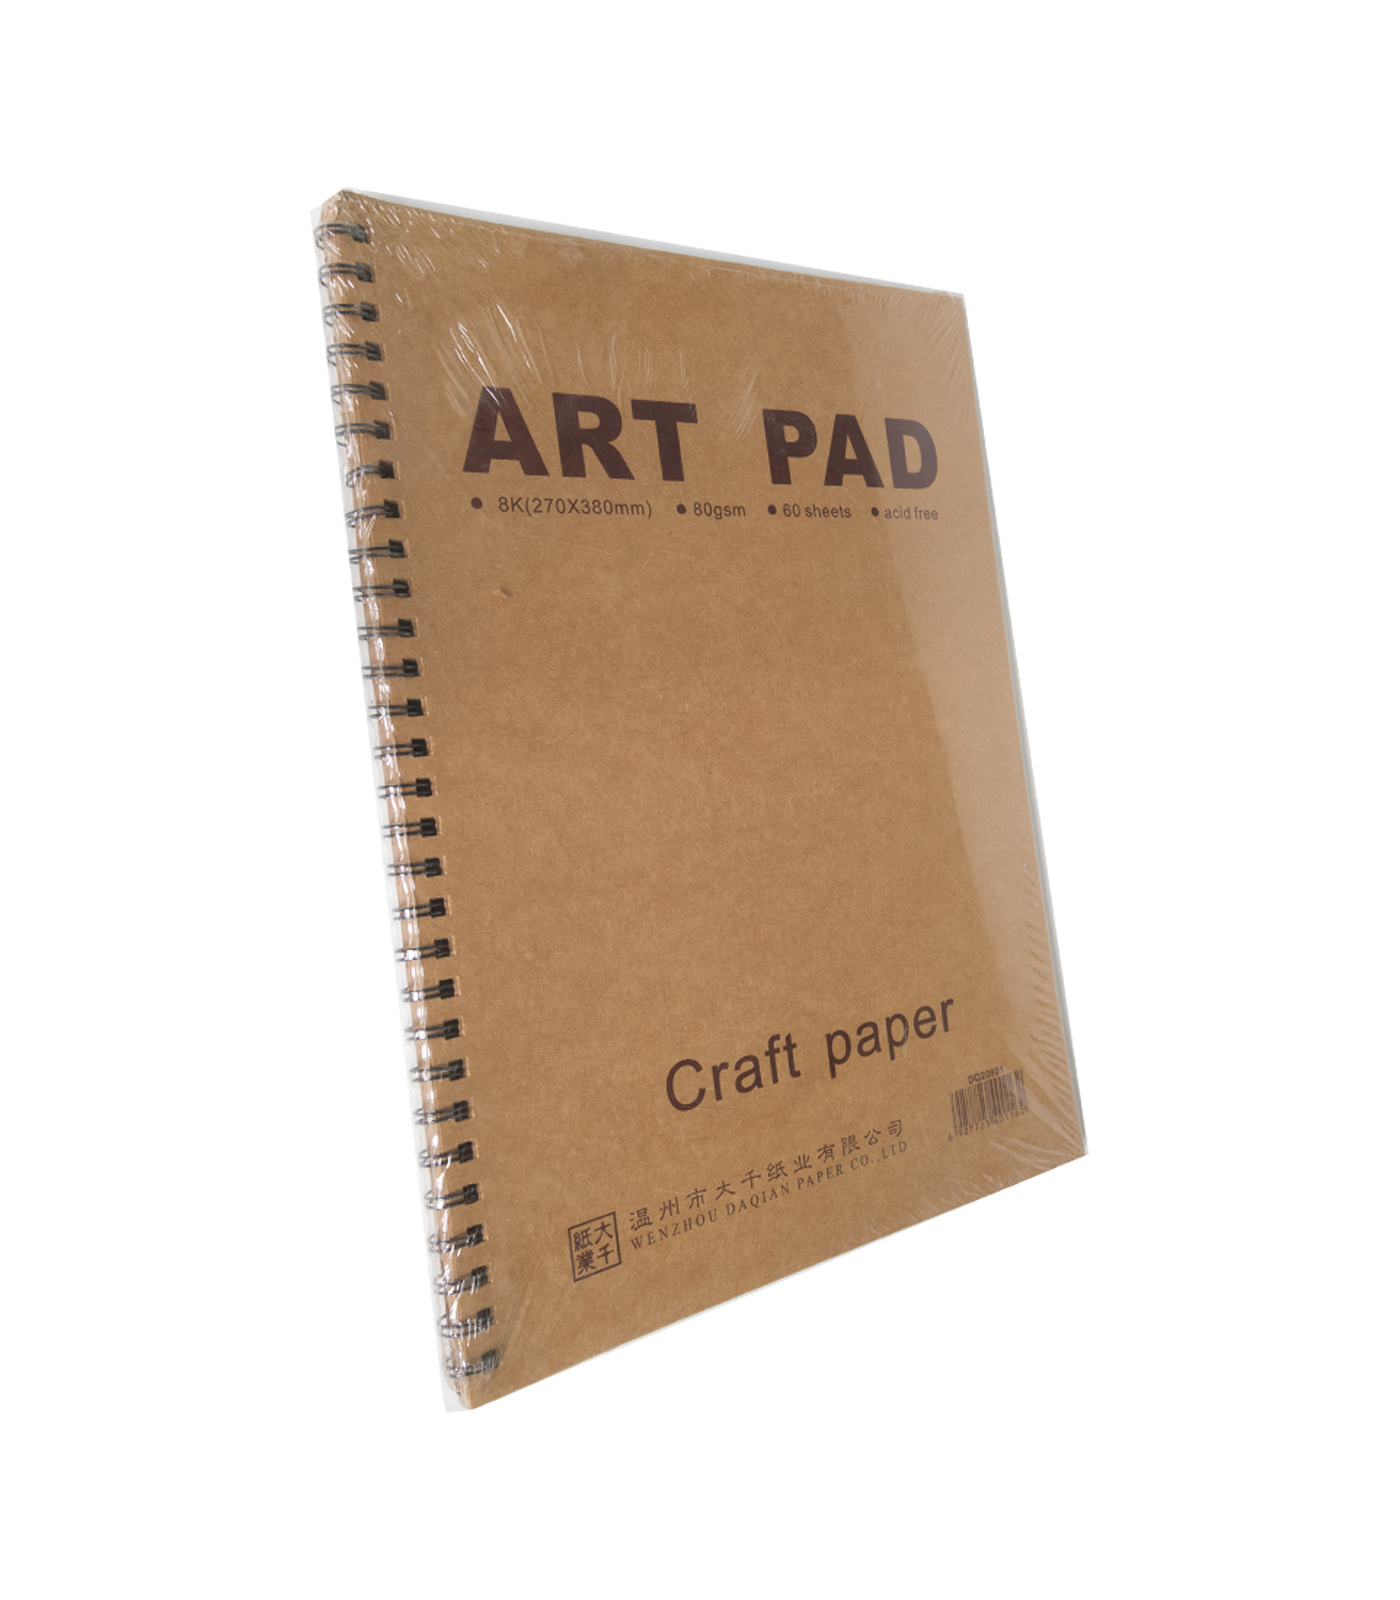 Sketch of Craft paper - A3 - 60 sheets